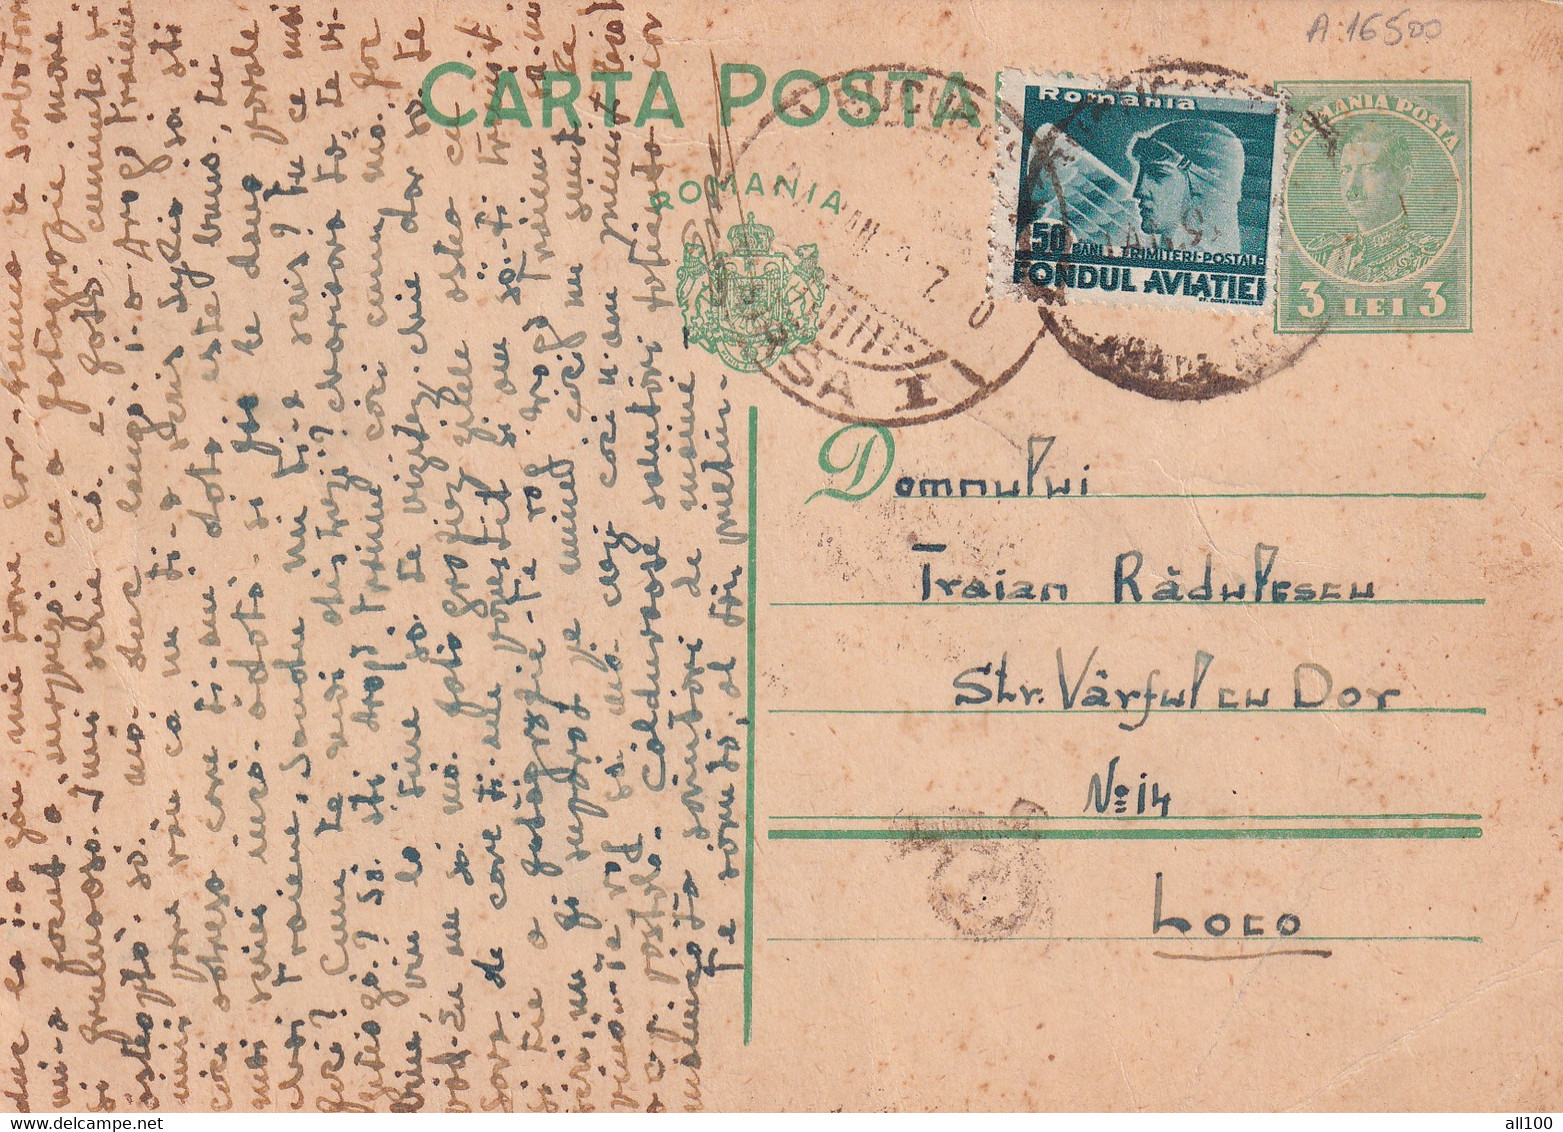 A 16502 - CARTA POSTALA 1932 FROM IASI TO BUCHAREST  KING MICHAEL 3LEI AVIATION STAMP - Lettres & Documents